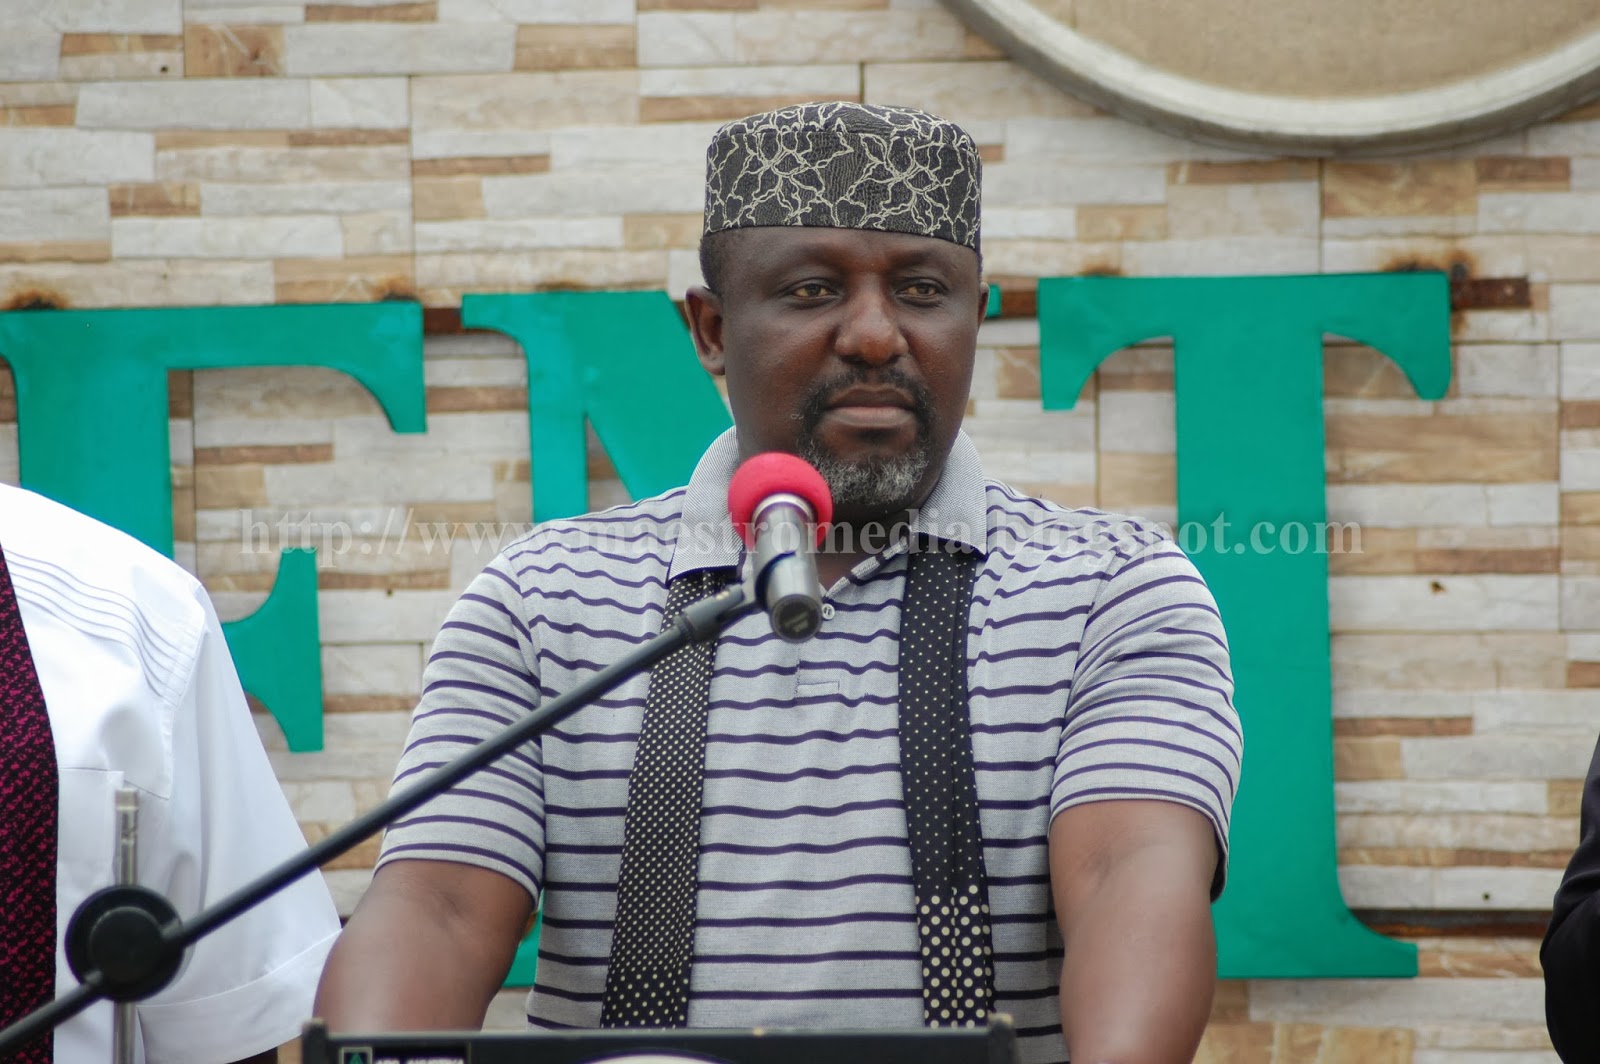 Imo State Bans The Use OF Posters By Politicians